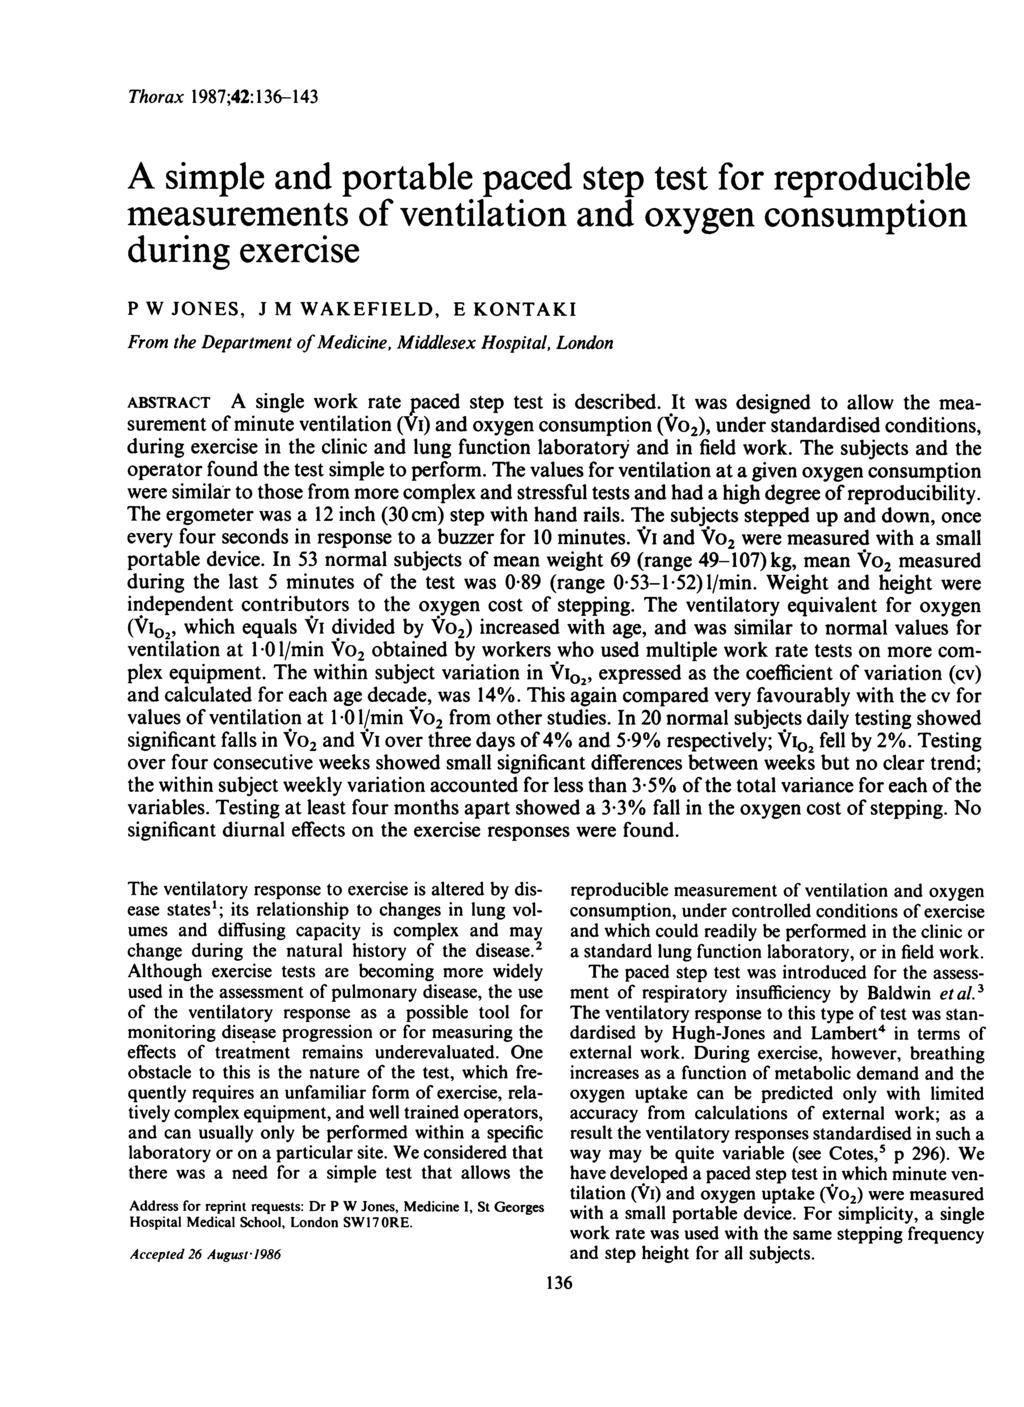 Thorax 1987;42:136-143 A simple and portable paced step test for reproducible measurements of ventilation and oxygen consumption during exercise P W JONES, J M WAKEFIELD, E KONTAKI From the